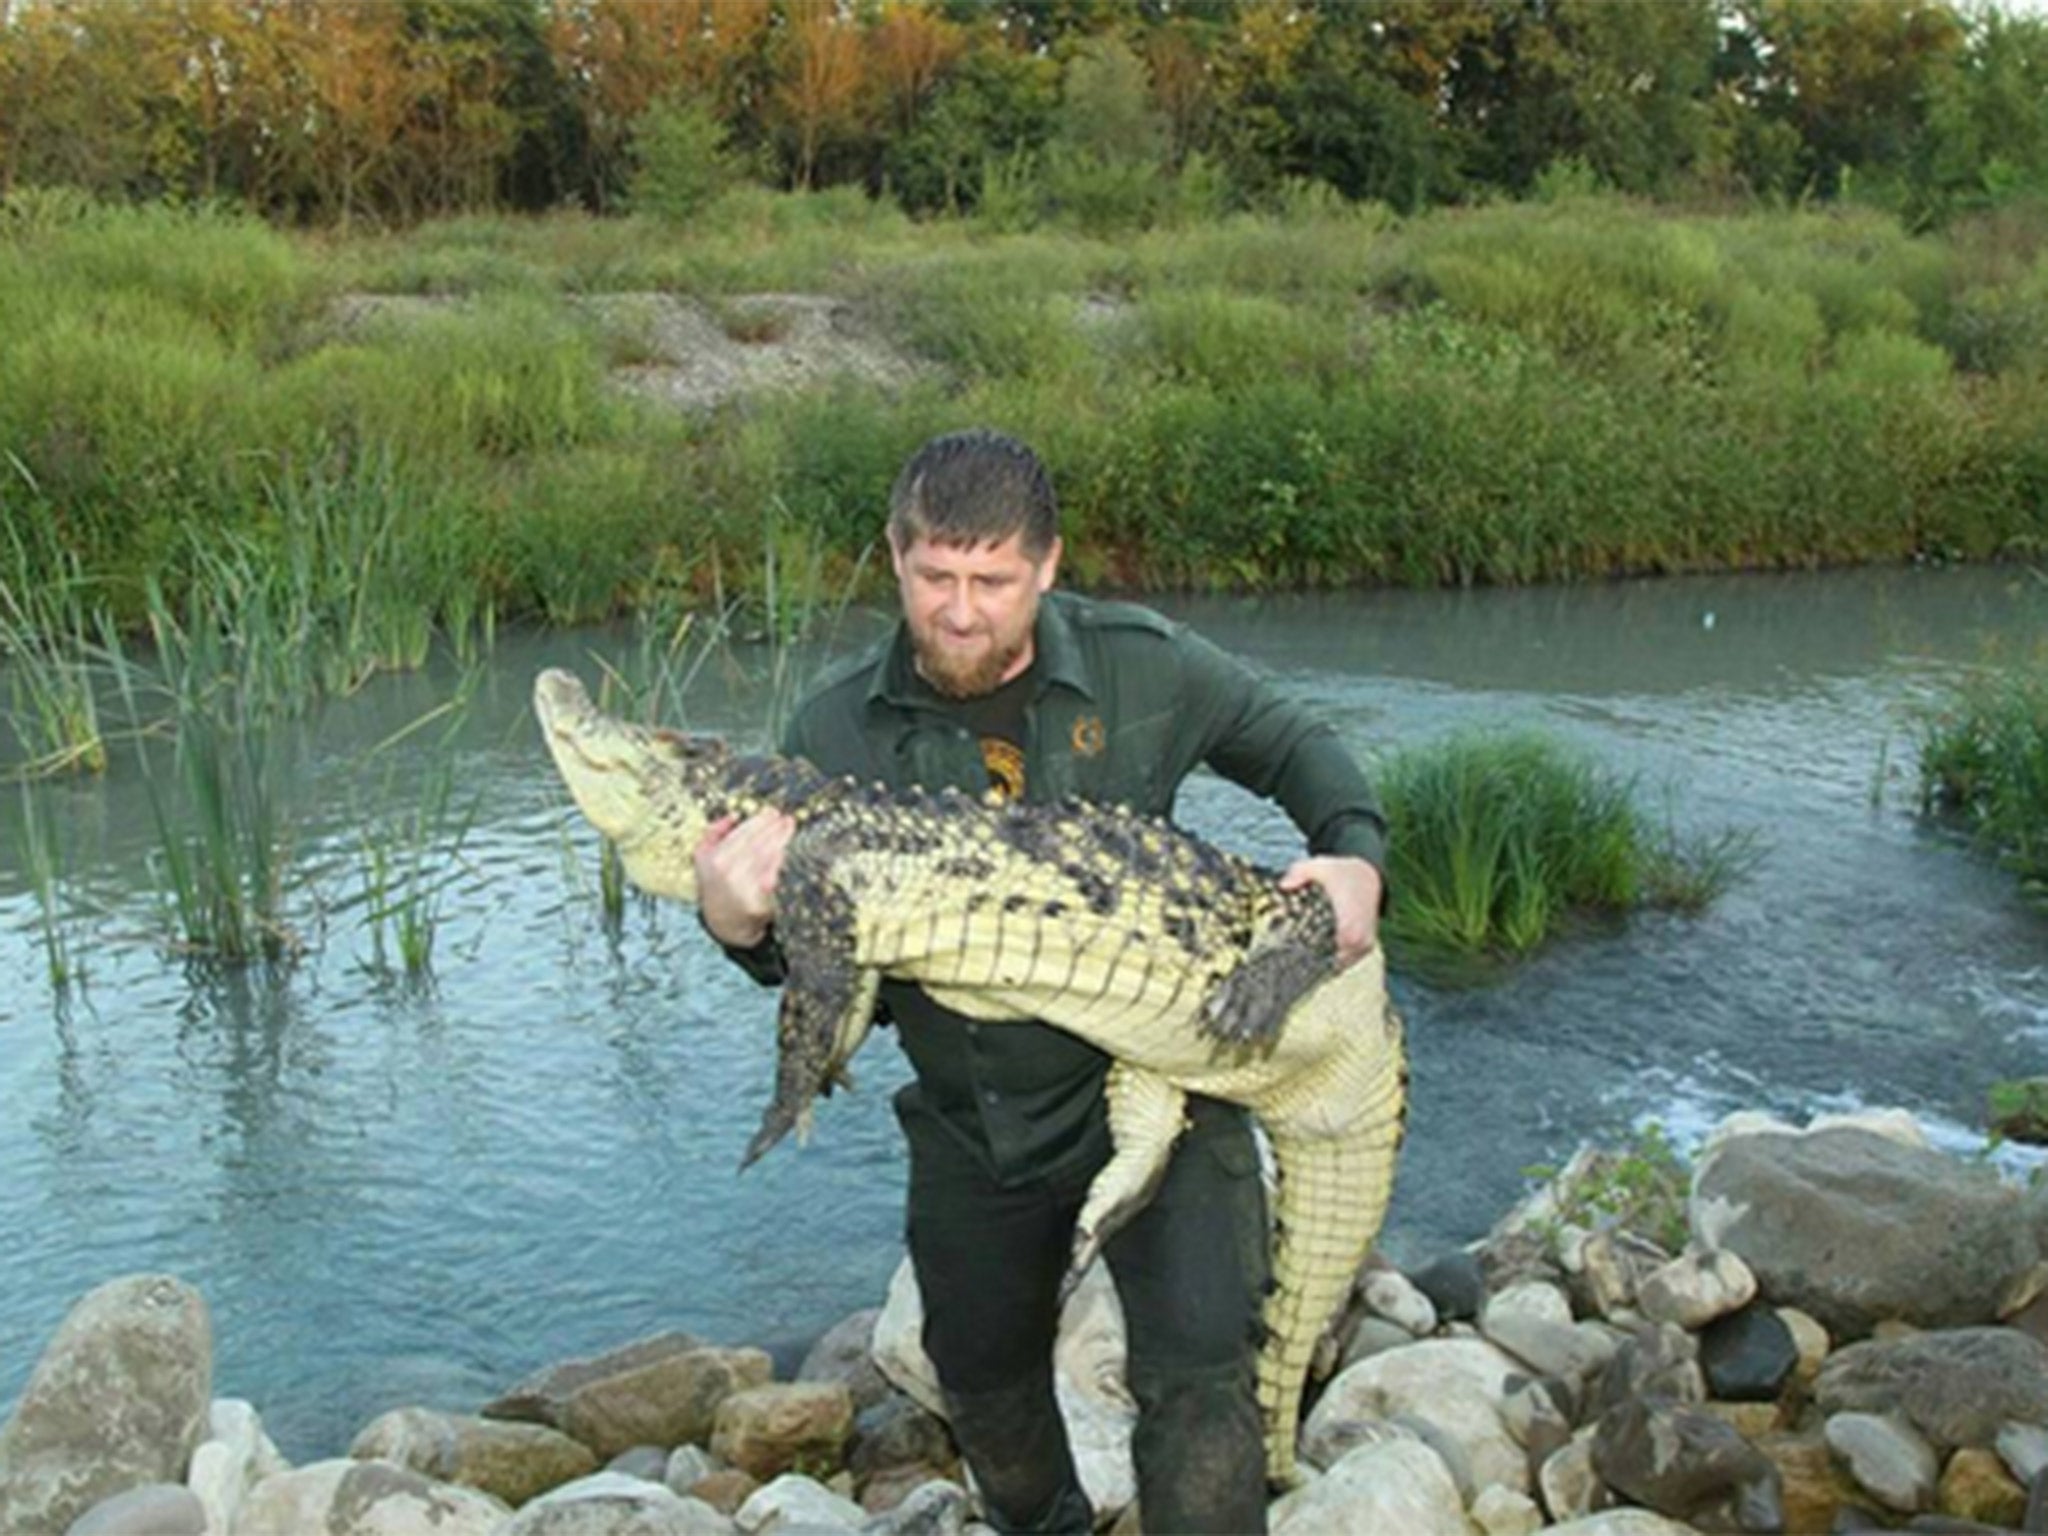 Kadyrov with the crocodile on the day the footage was captured